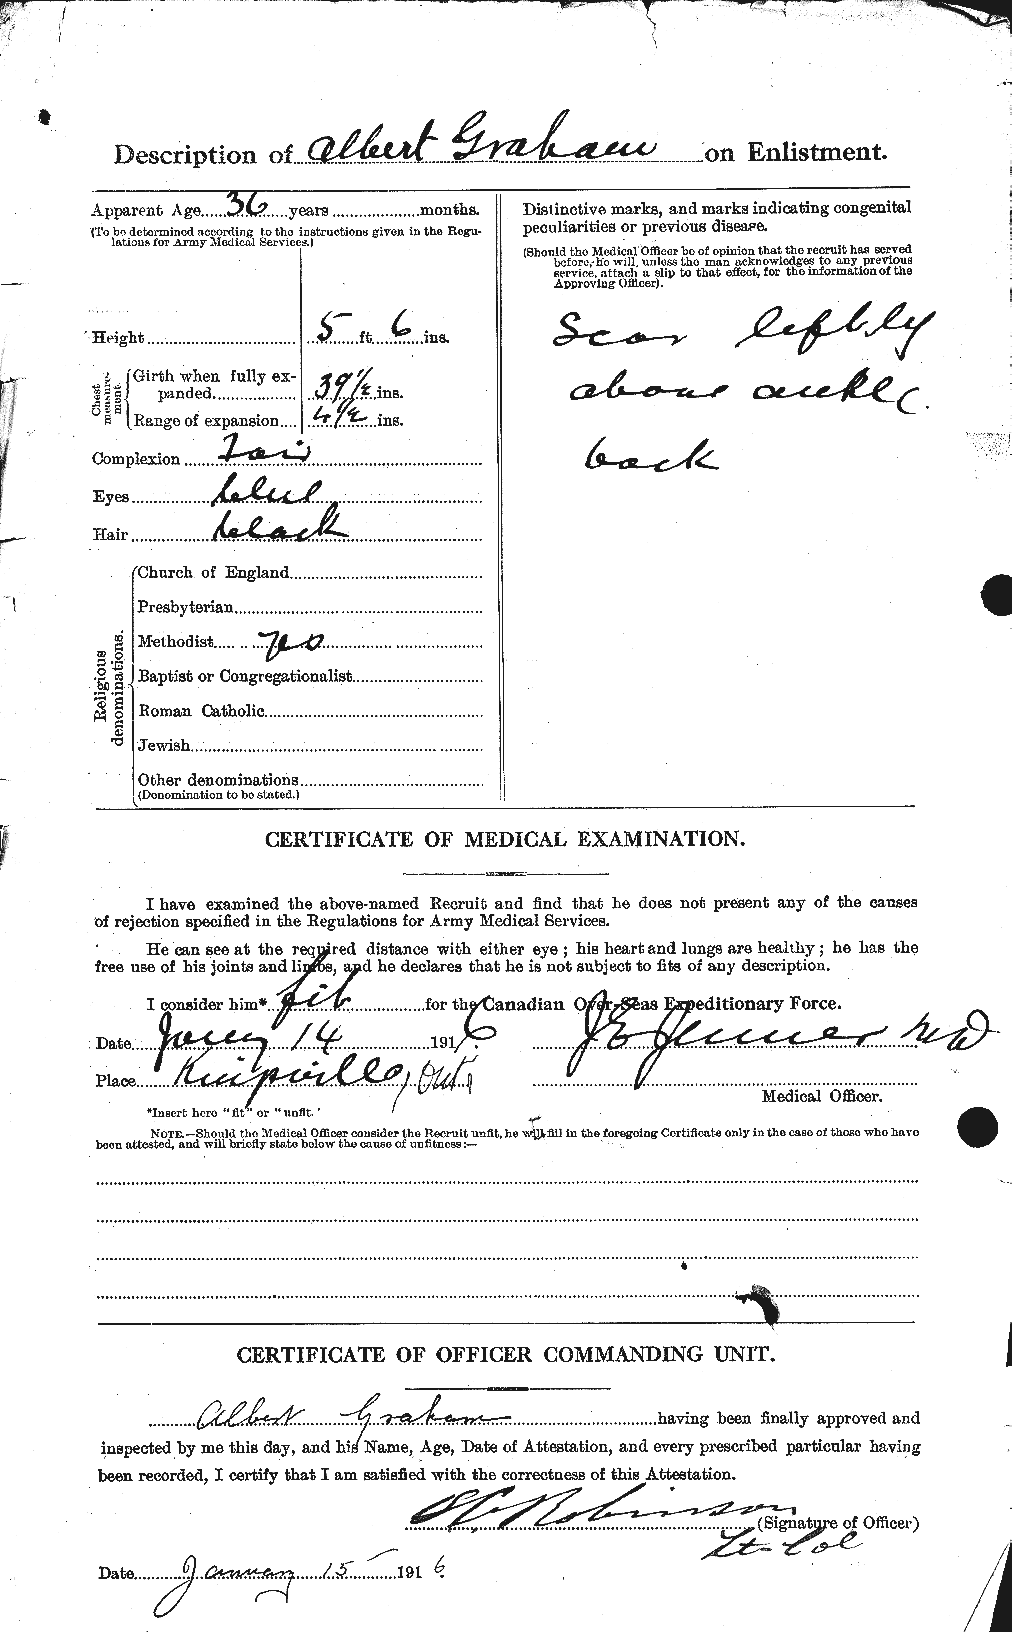 Personnel Records of the First World War - CEF 359566b